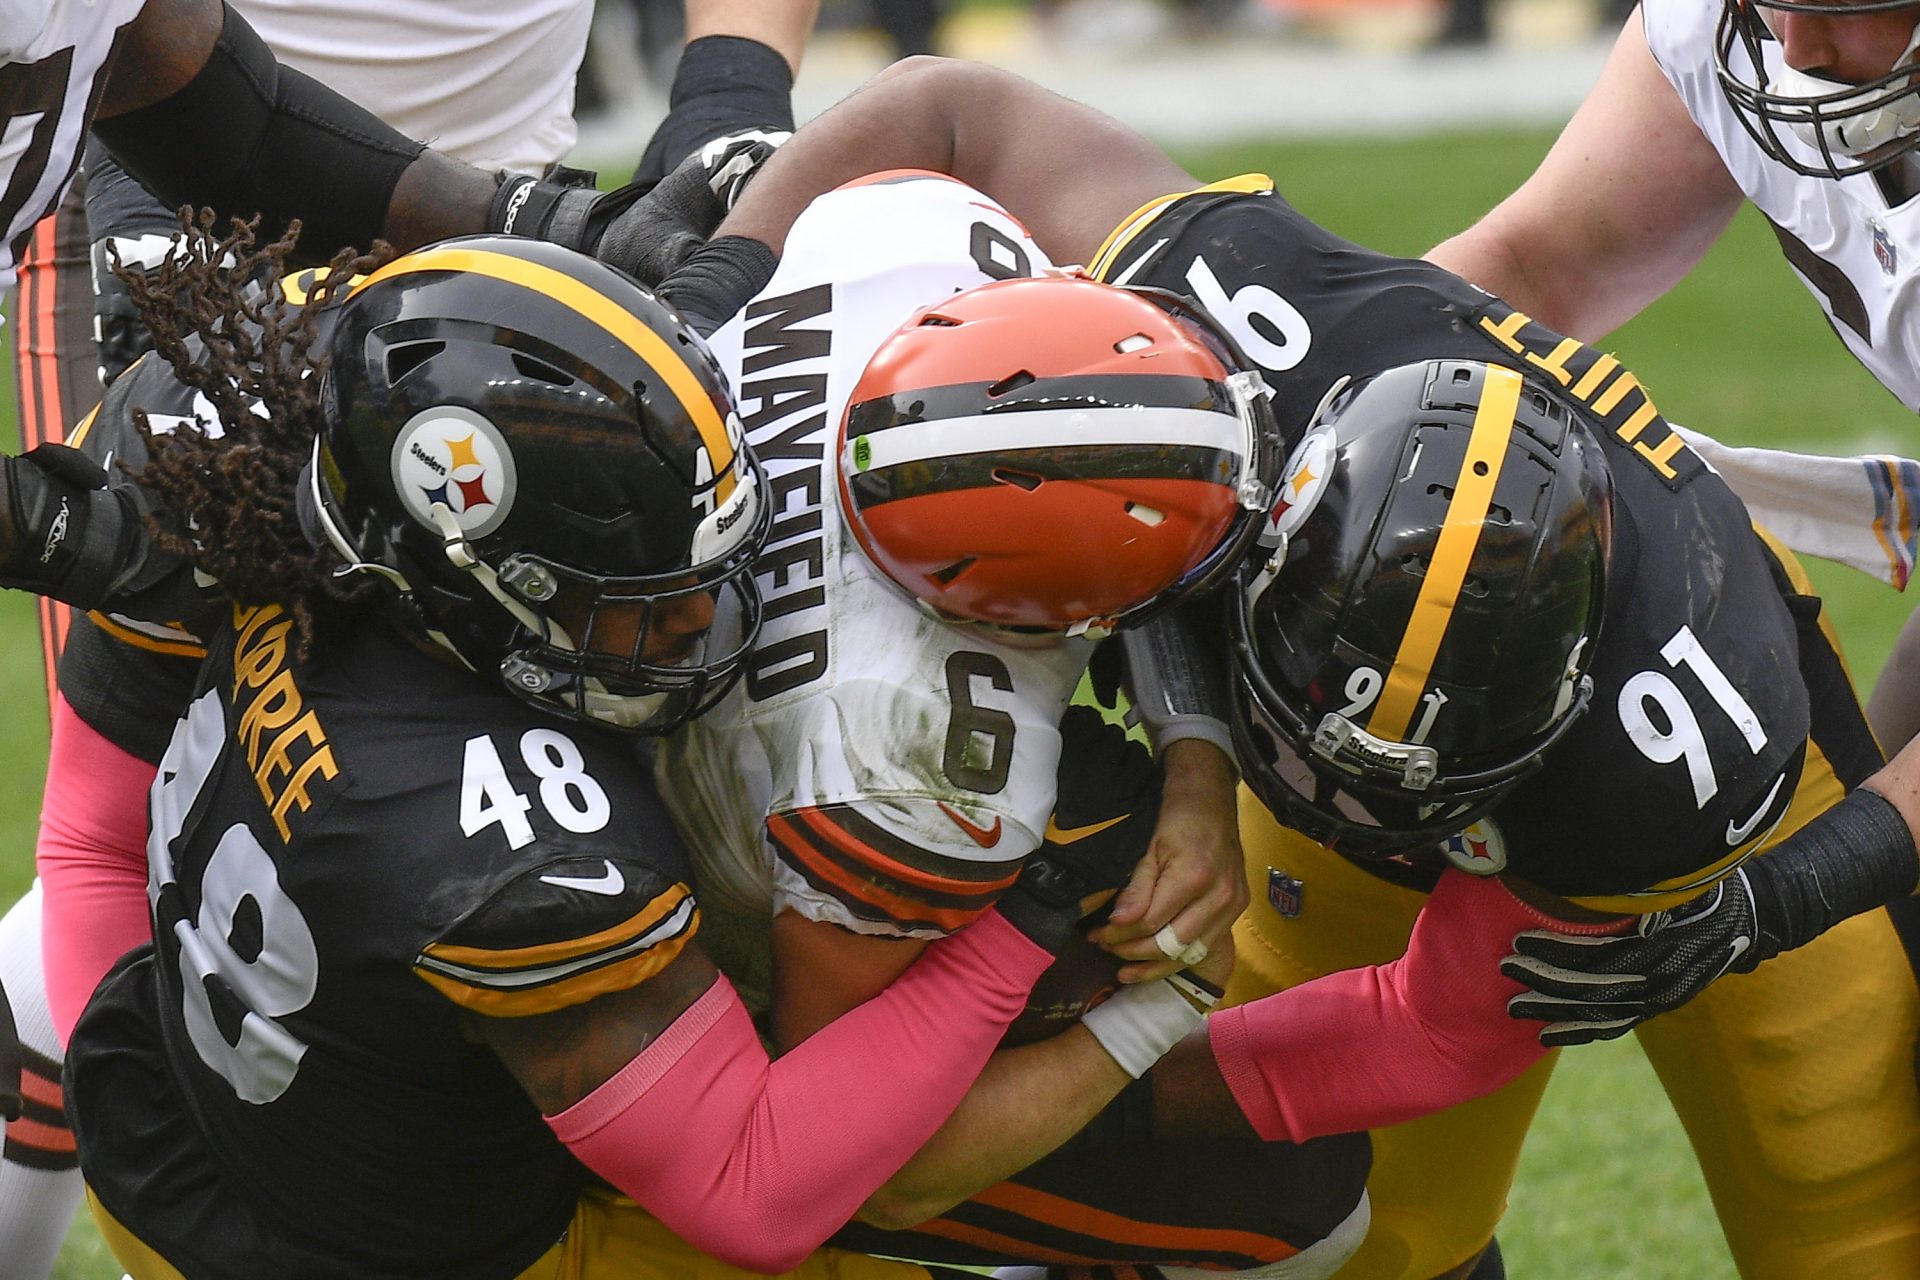 Cleveland Browns quarterback Baker Mayfield (6) is sacked by Pittsburgh Steelers defensive end Stephon Tuitt (91) and outside linebacker Bud Dupree (48) during the first half of an NFL football game, Sunday, Oct. 18, 2020, in Pittsburgh.